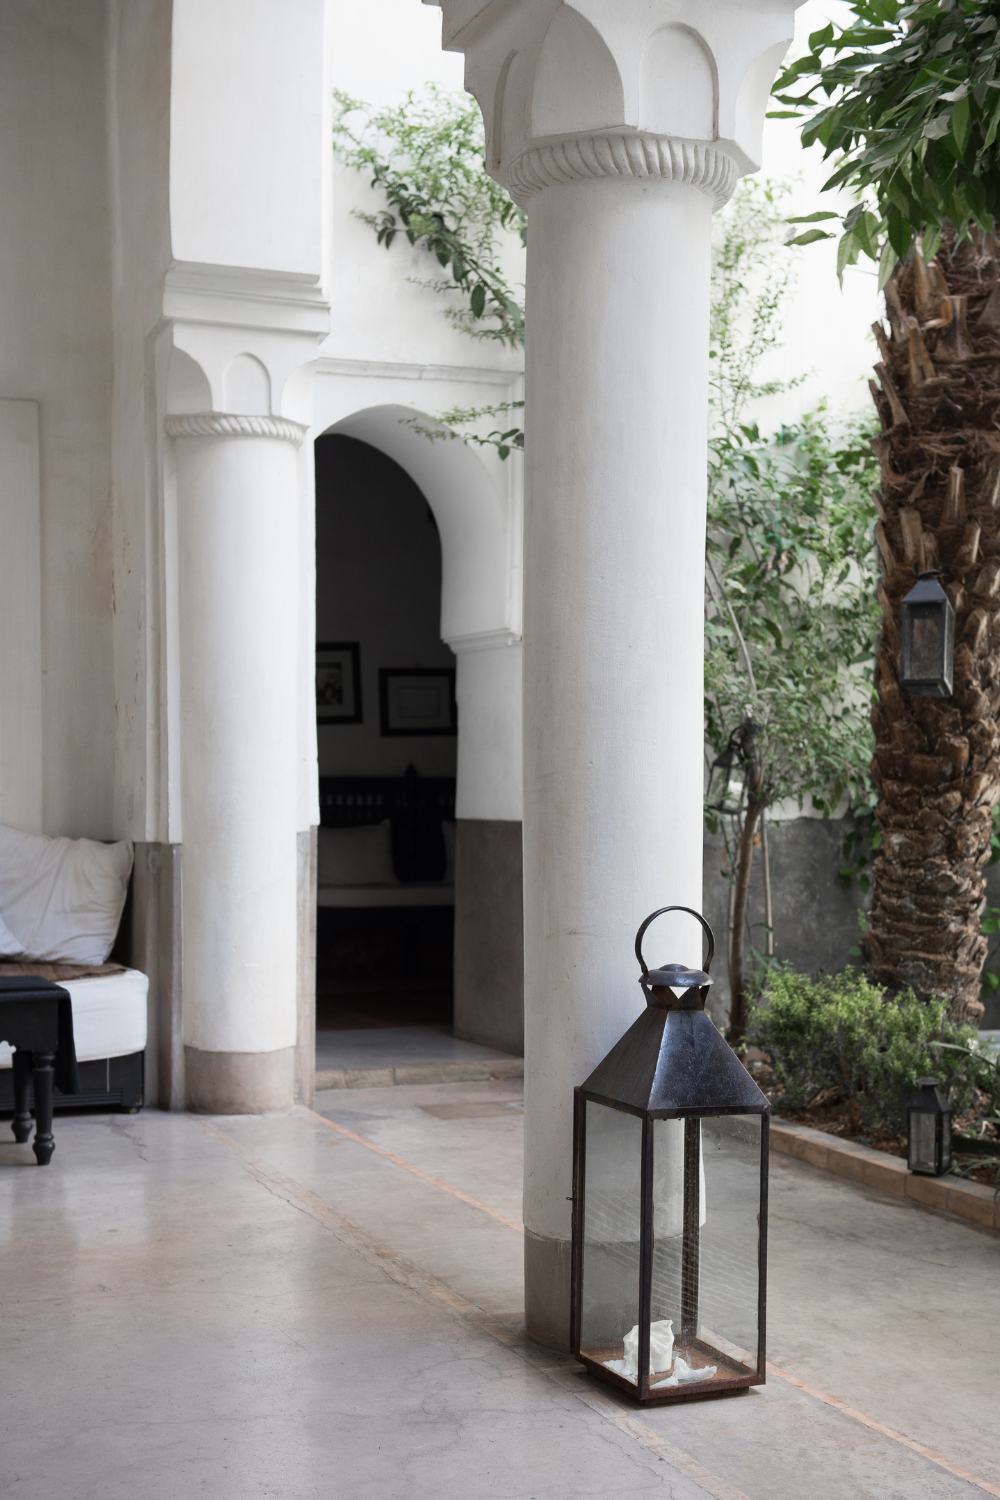 A peaceful courtyard with white columns, a lantern, and greenery, creating a serene atmosphere at Liv Med Spa.